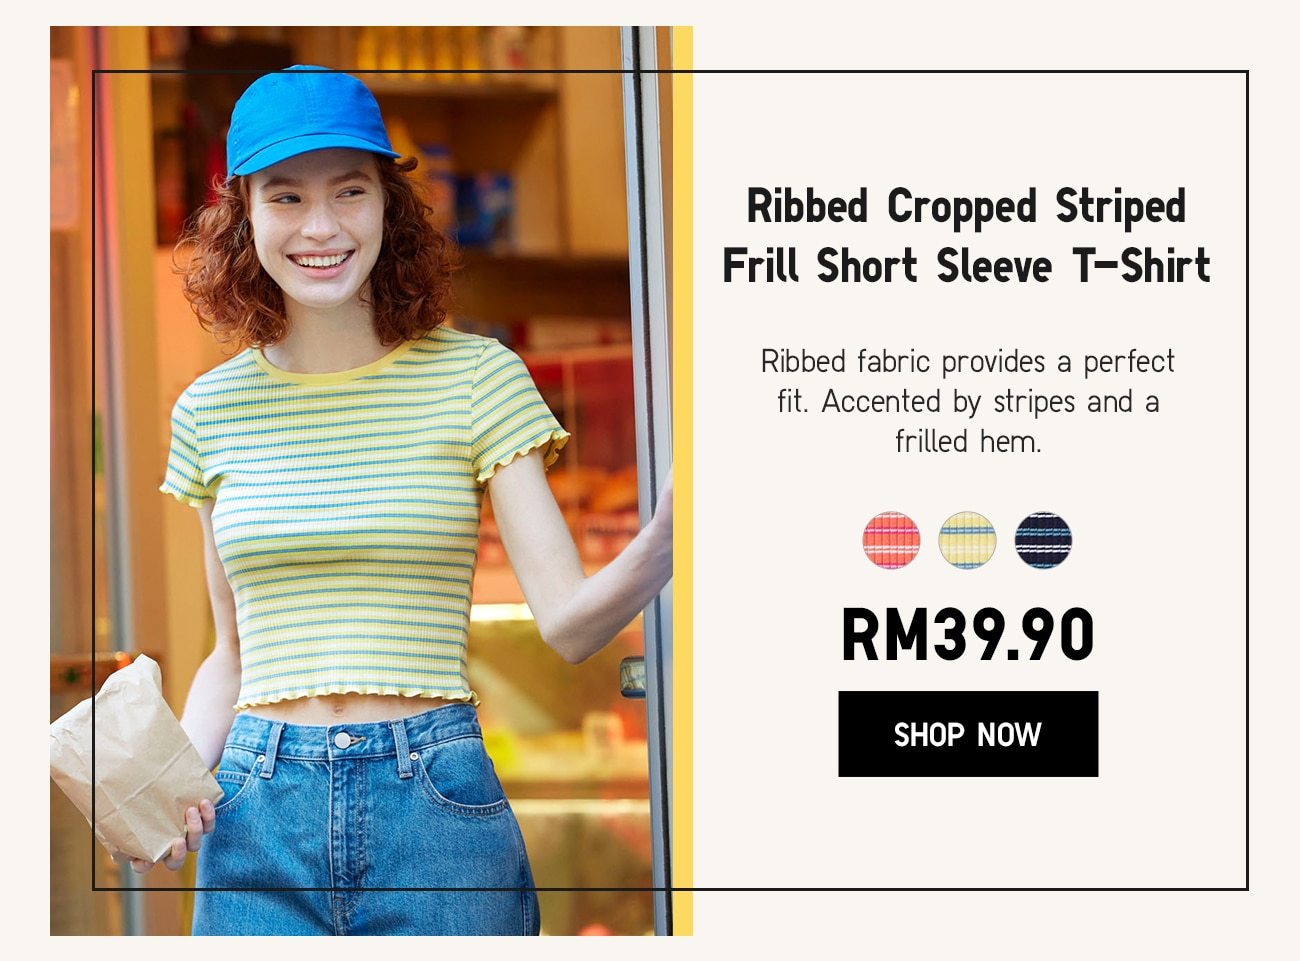 Ribbed Cropped Striped Frill Short Sleeve T-Shirt